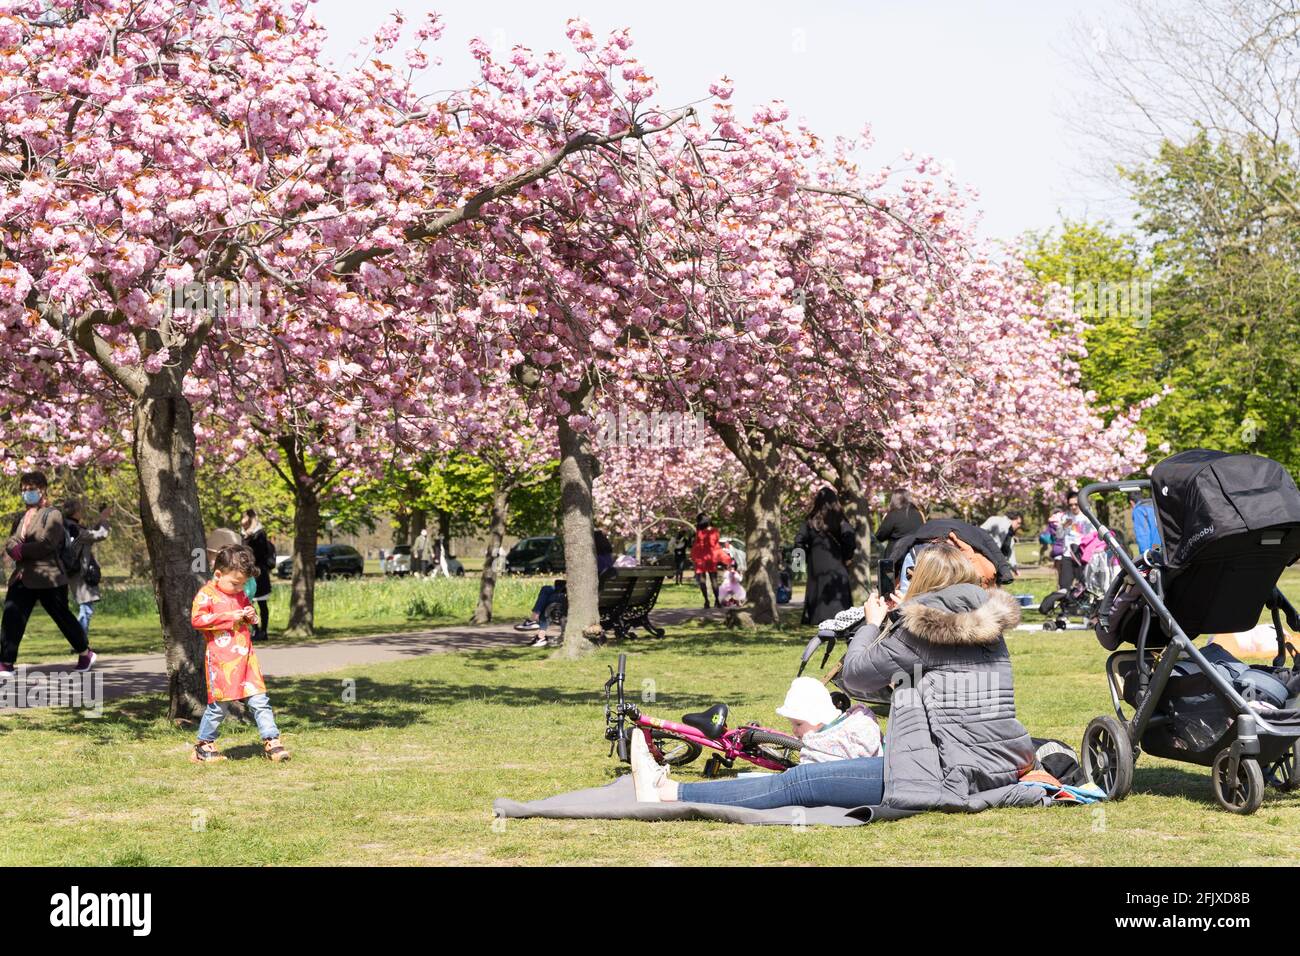 family day out enjoy the sunshine and cherry blossom in London grrenwich Park Stock Photo